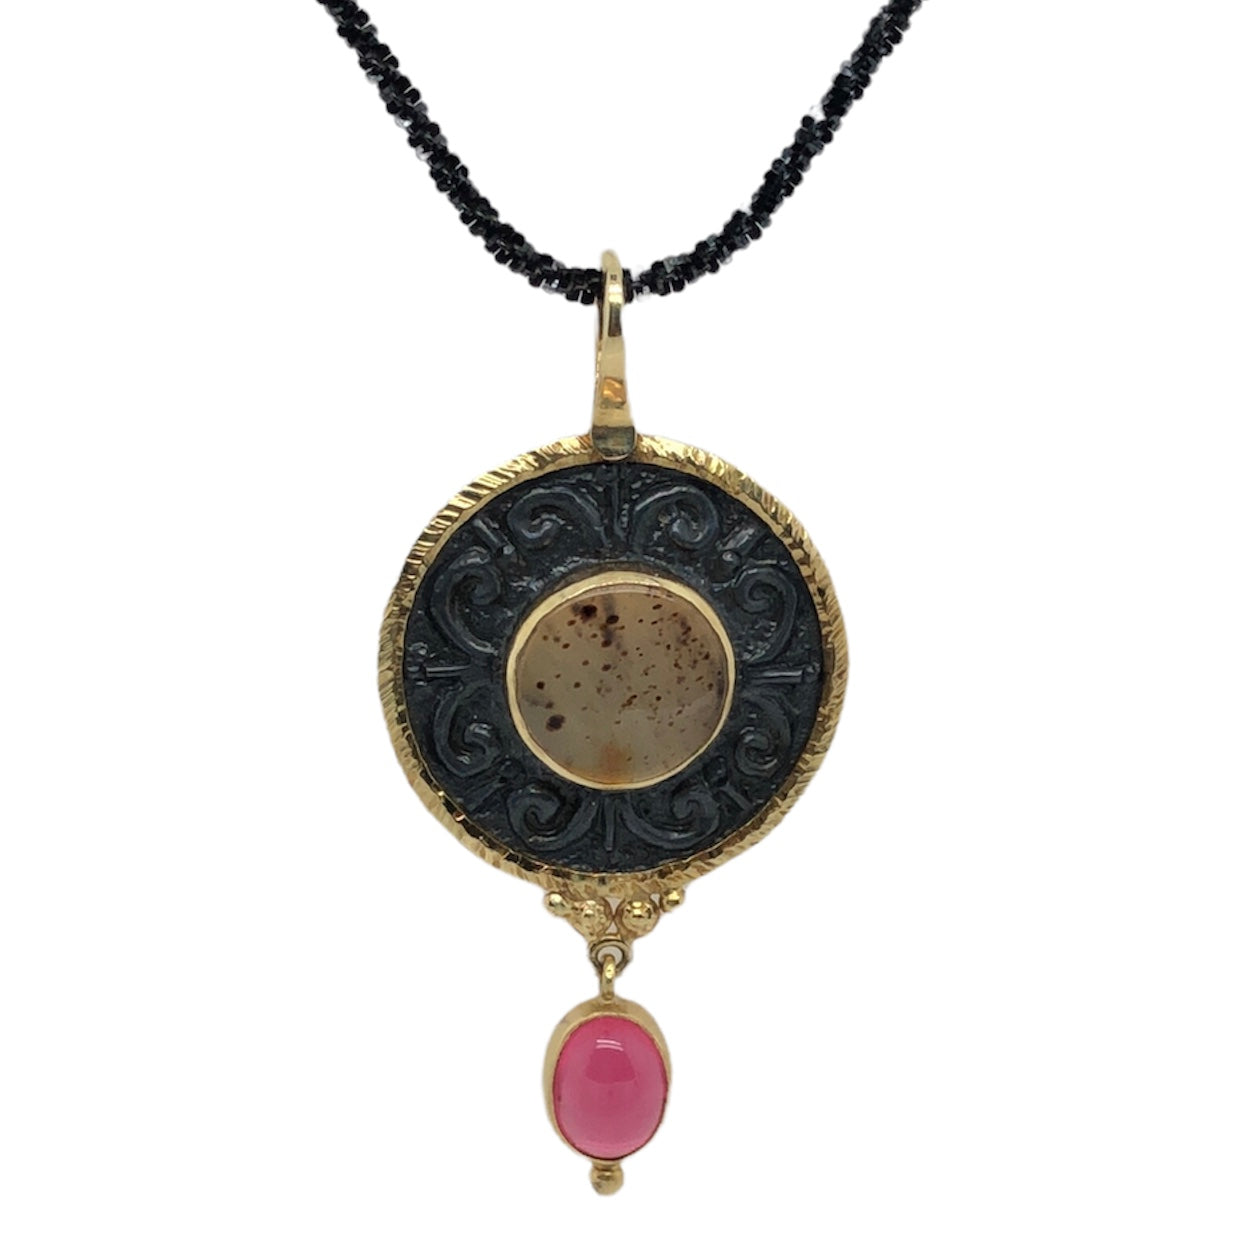 White Horse Designs - Round Repousse Necklace with Agate & Pink Tourmaline  CN0088